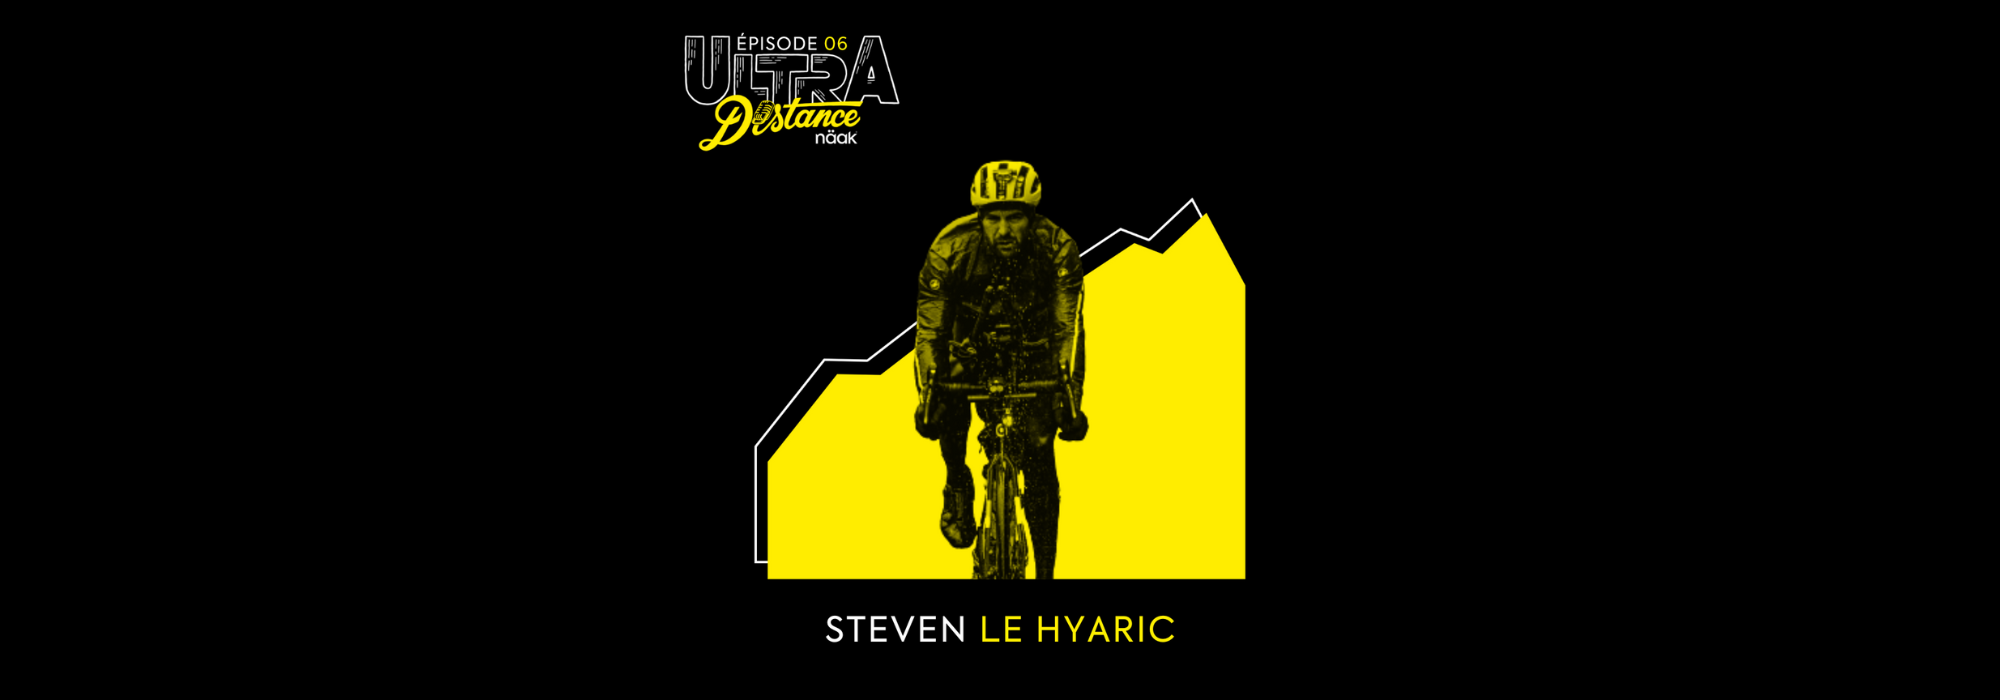 Podcast Episode #6 | Race Across France with Steven Le Hyaric